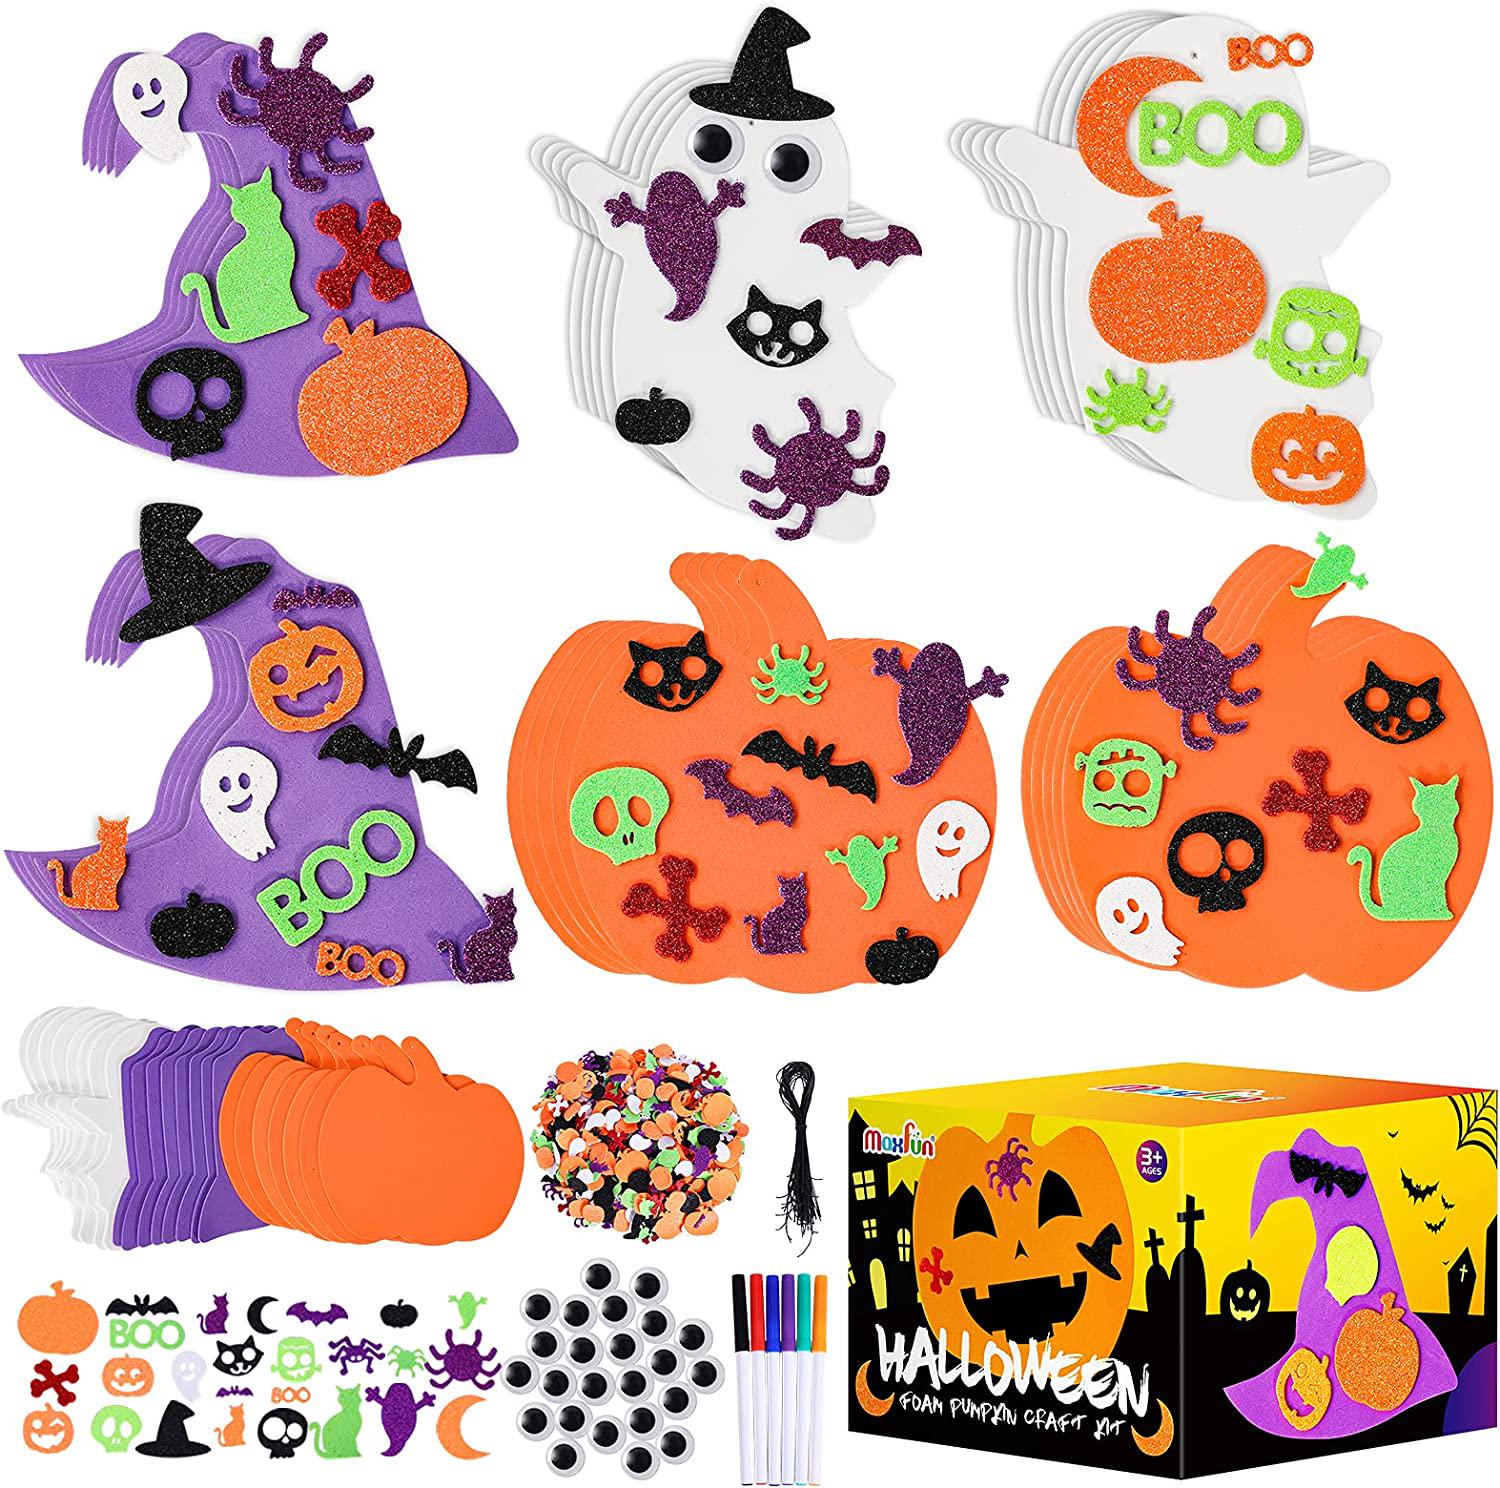 Max Fun, Max Fun 302PCS Halloween Foam Stickers Set, Pumpkin Ghost Witch Hat Halloween Decorations for Kids Crafts Party Favors Supplies Halloween Craft Kits for Kids